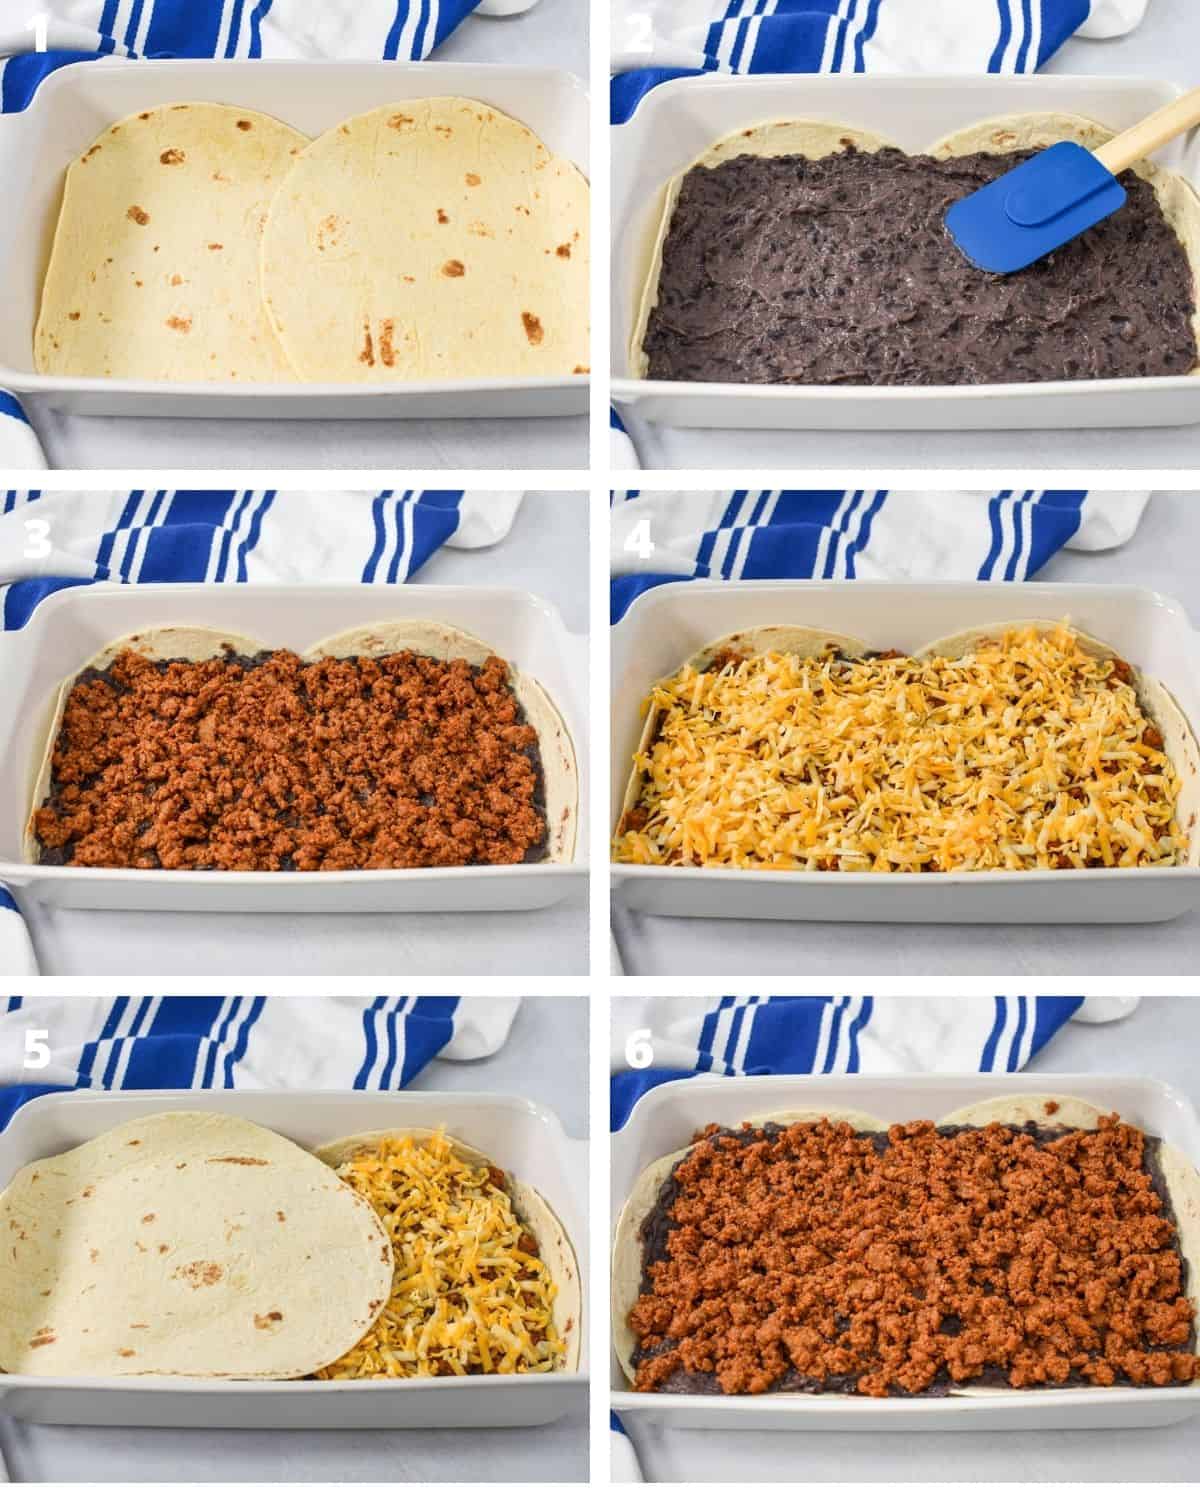 A collage of six images showing the steps to building the casserole.